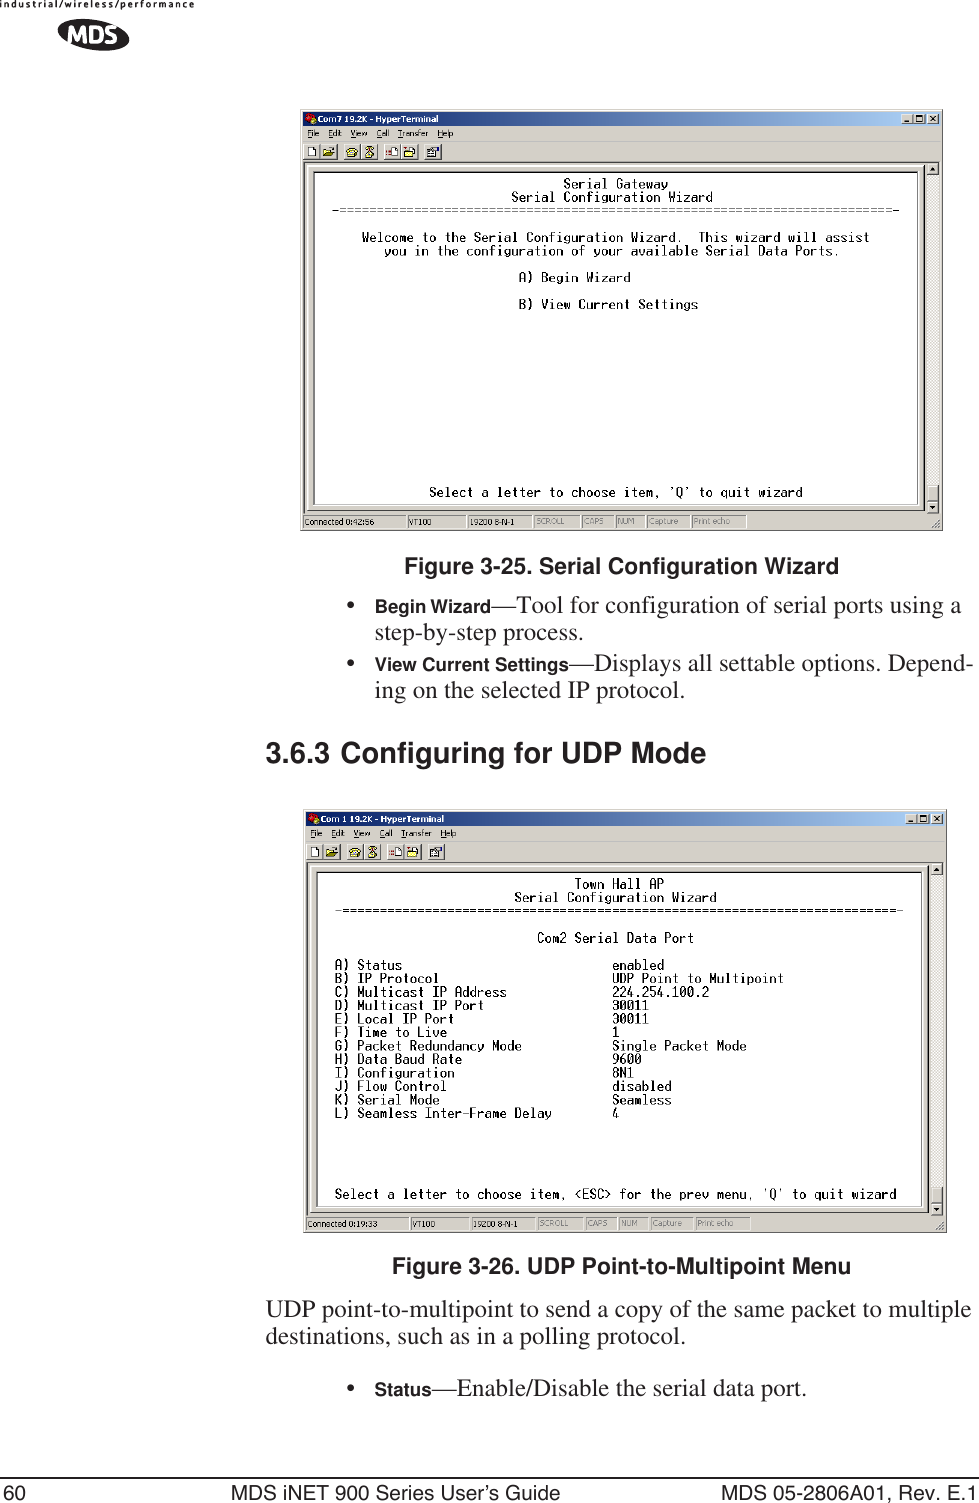 60 MDS iNET 900 Series User’s Guide MDS 05-2806A01, Rev. E.1 Figure 3-25. Serial Configuration Wizard•Begin Wizard—Tool for configuration of serial ports using a step-by-step process.•View Current Settings—Displays all settable options. Depend-ing on the selected IP protocol.3.6.3 Configuring for UDP ModeInvisible place holderFigure 3-26. UDP Point-to-Multipoint MenuUDP point-to-multipoint to send a copy of the same packet to multiple destinations, such as in a polling protocol.•Status—Enable/Disable the serial data port. 